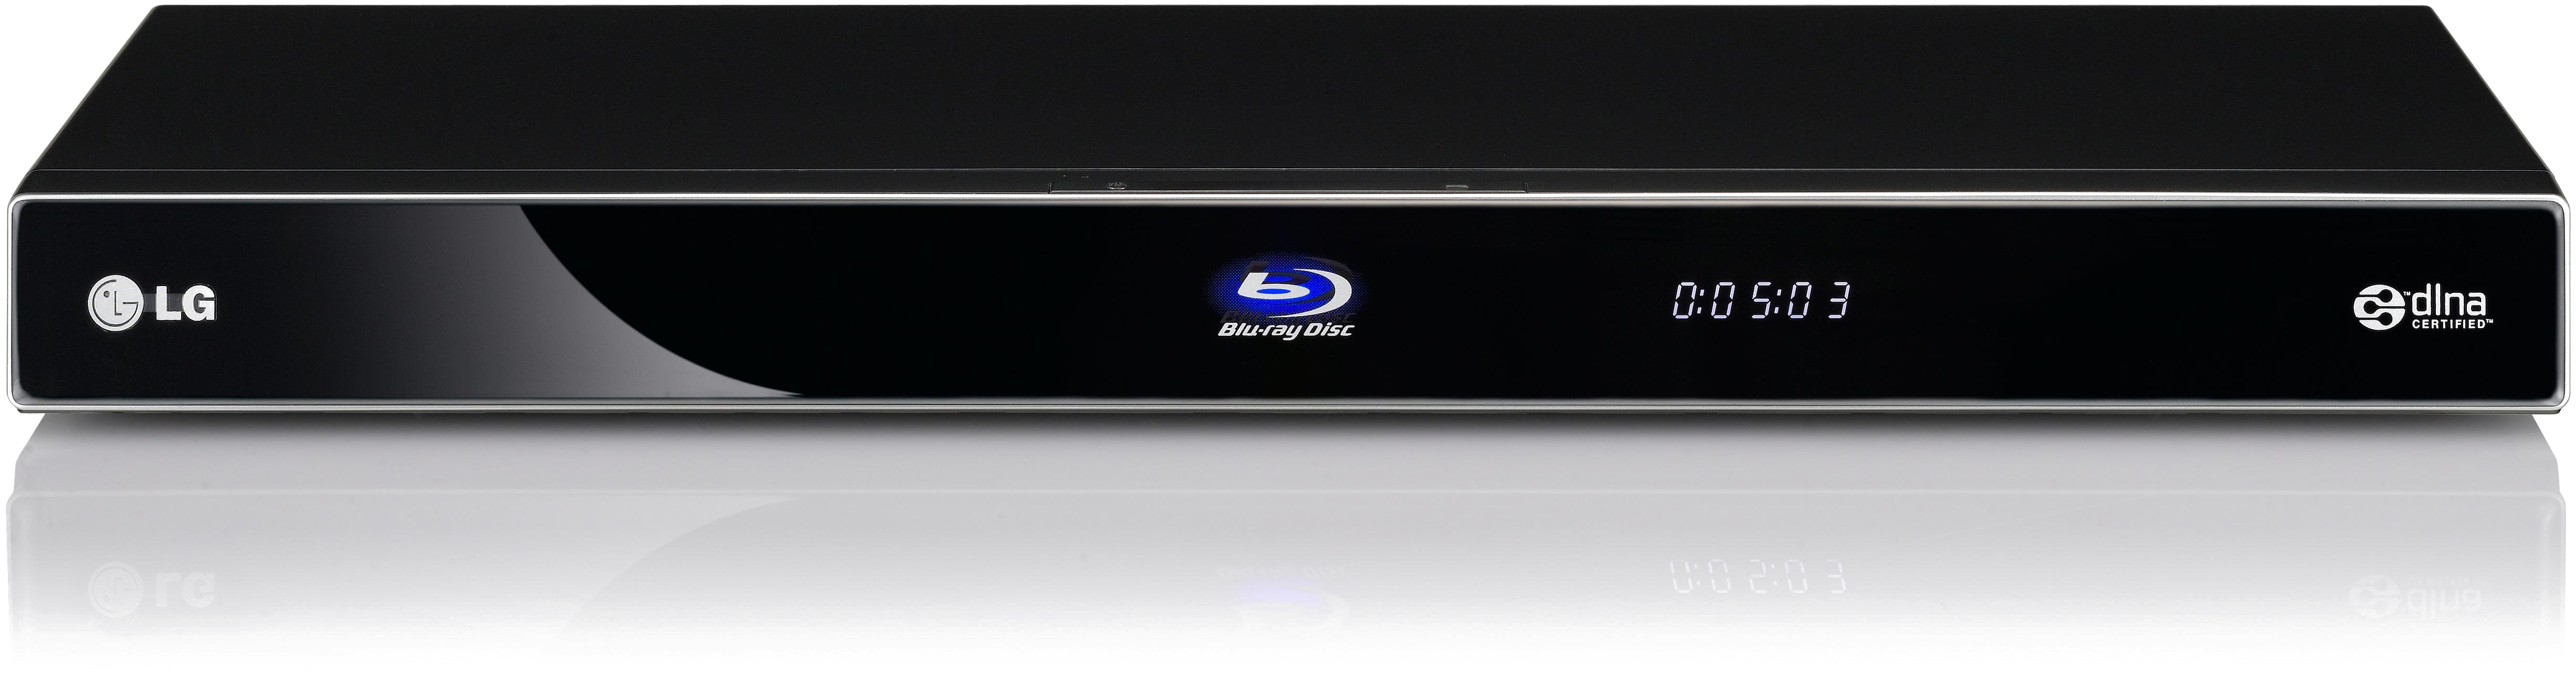 L G Bluray Player Front View PNG